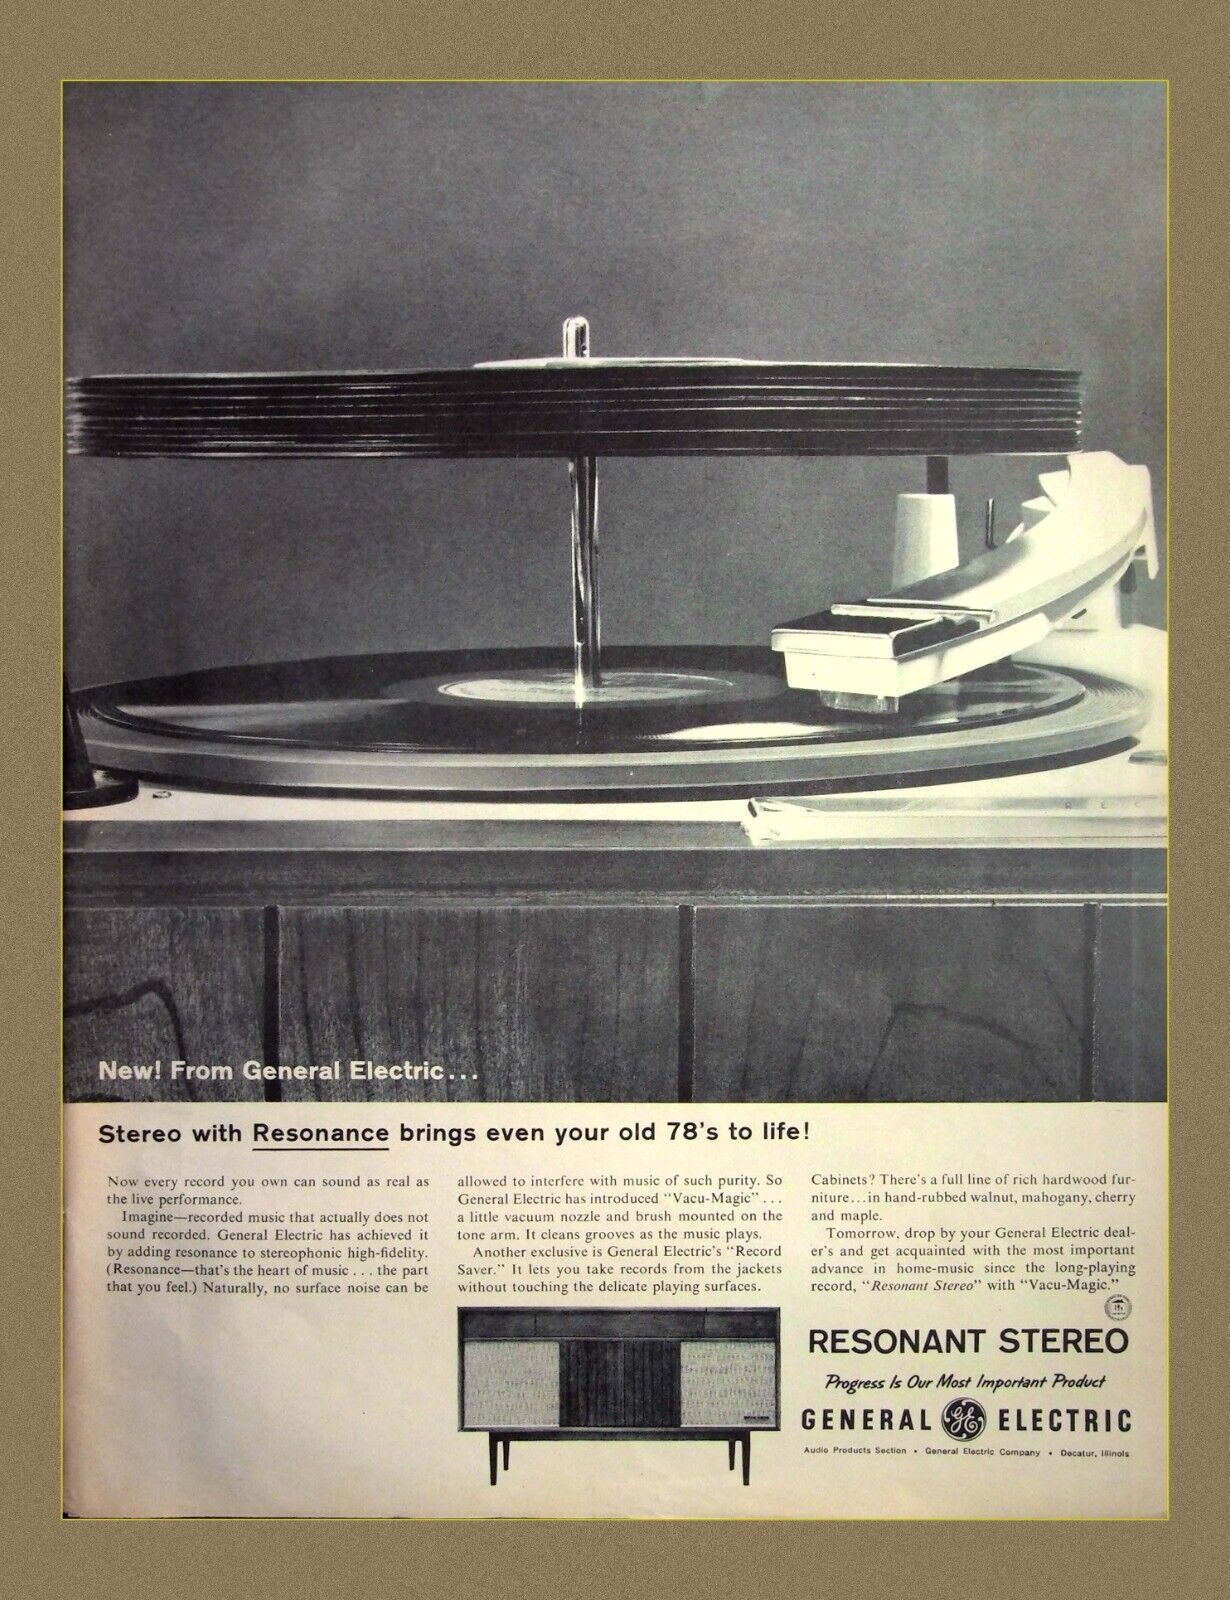 1960 General Electric Resonant Stereo Brings even your old 78s to Life Original